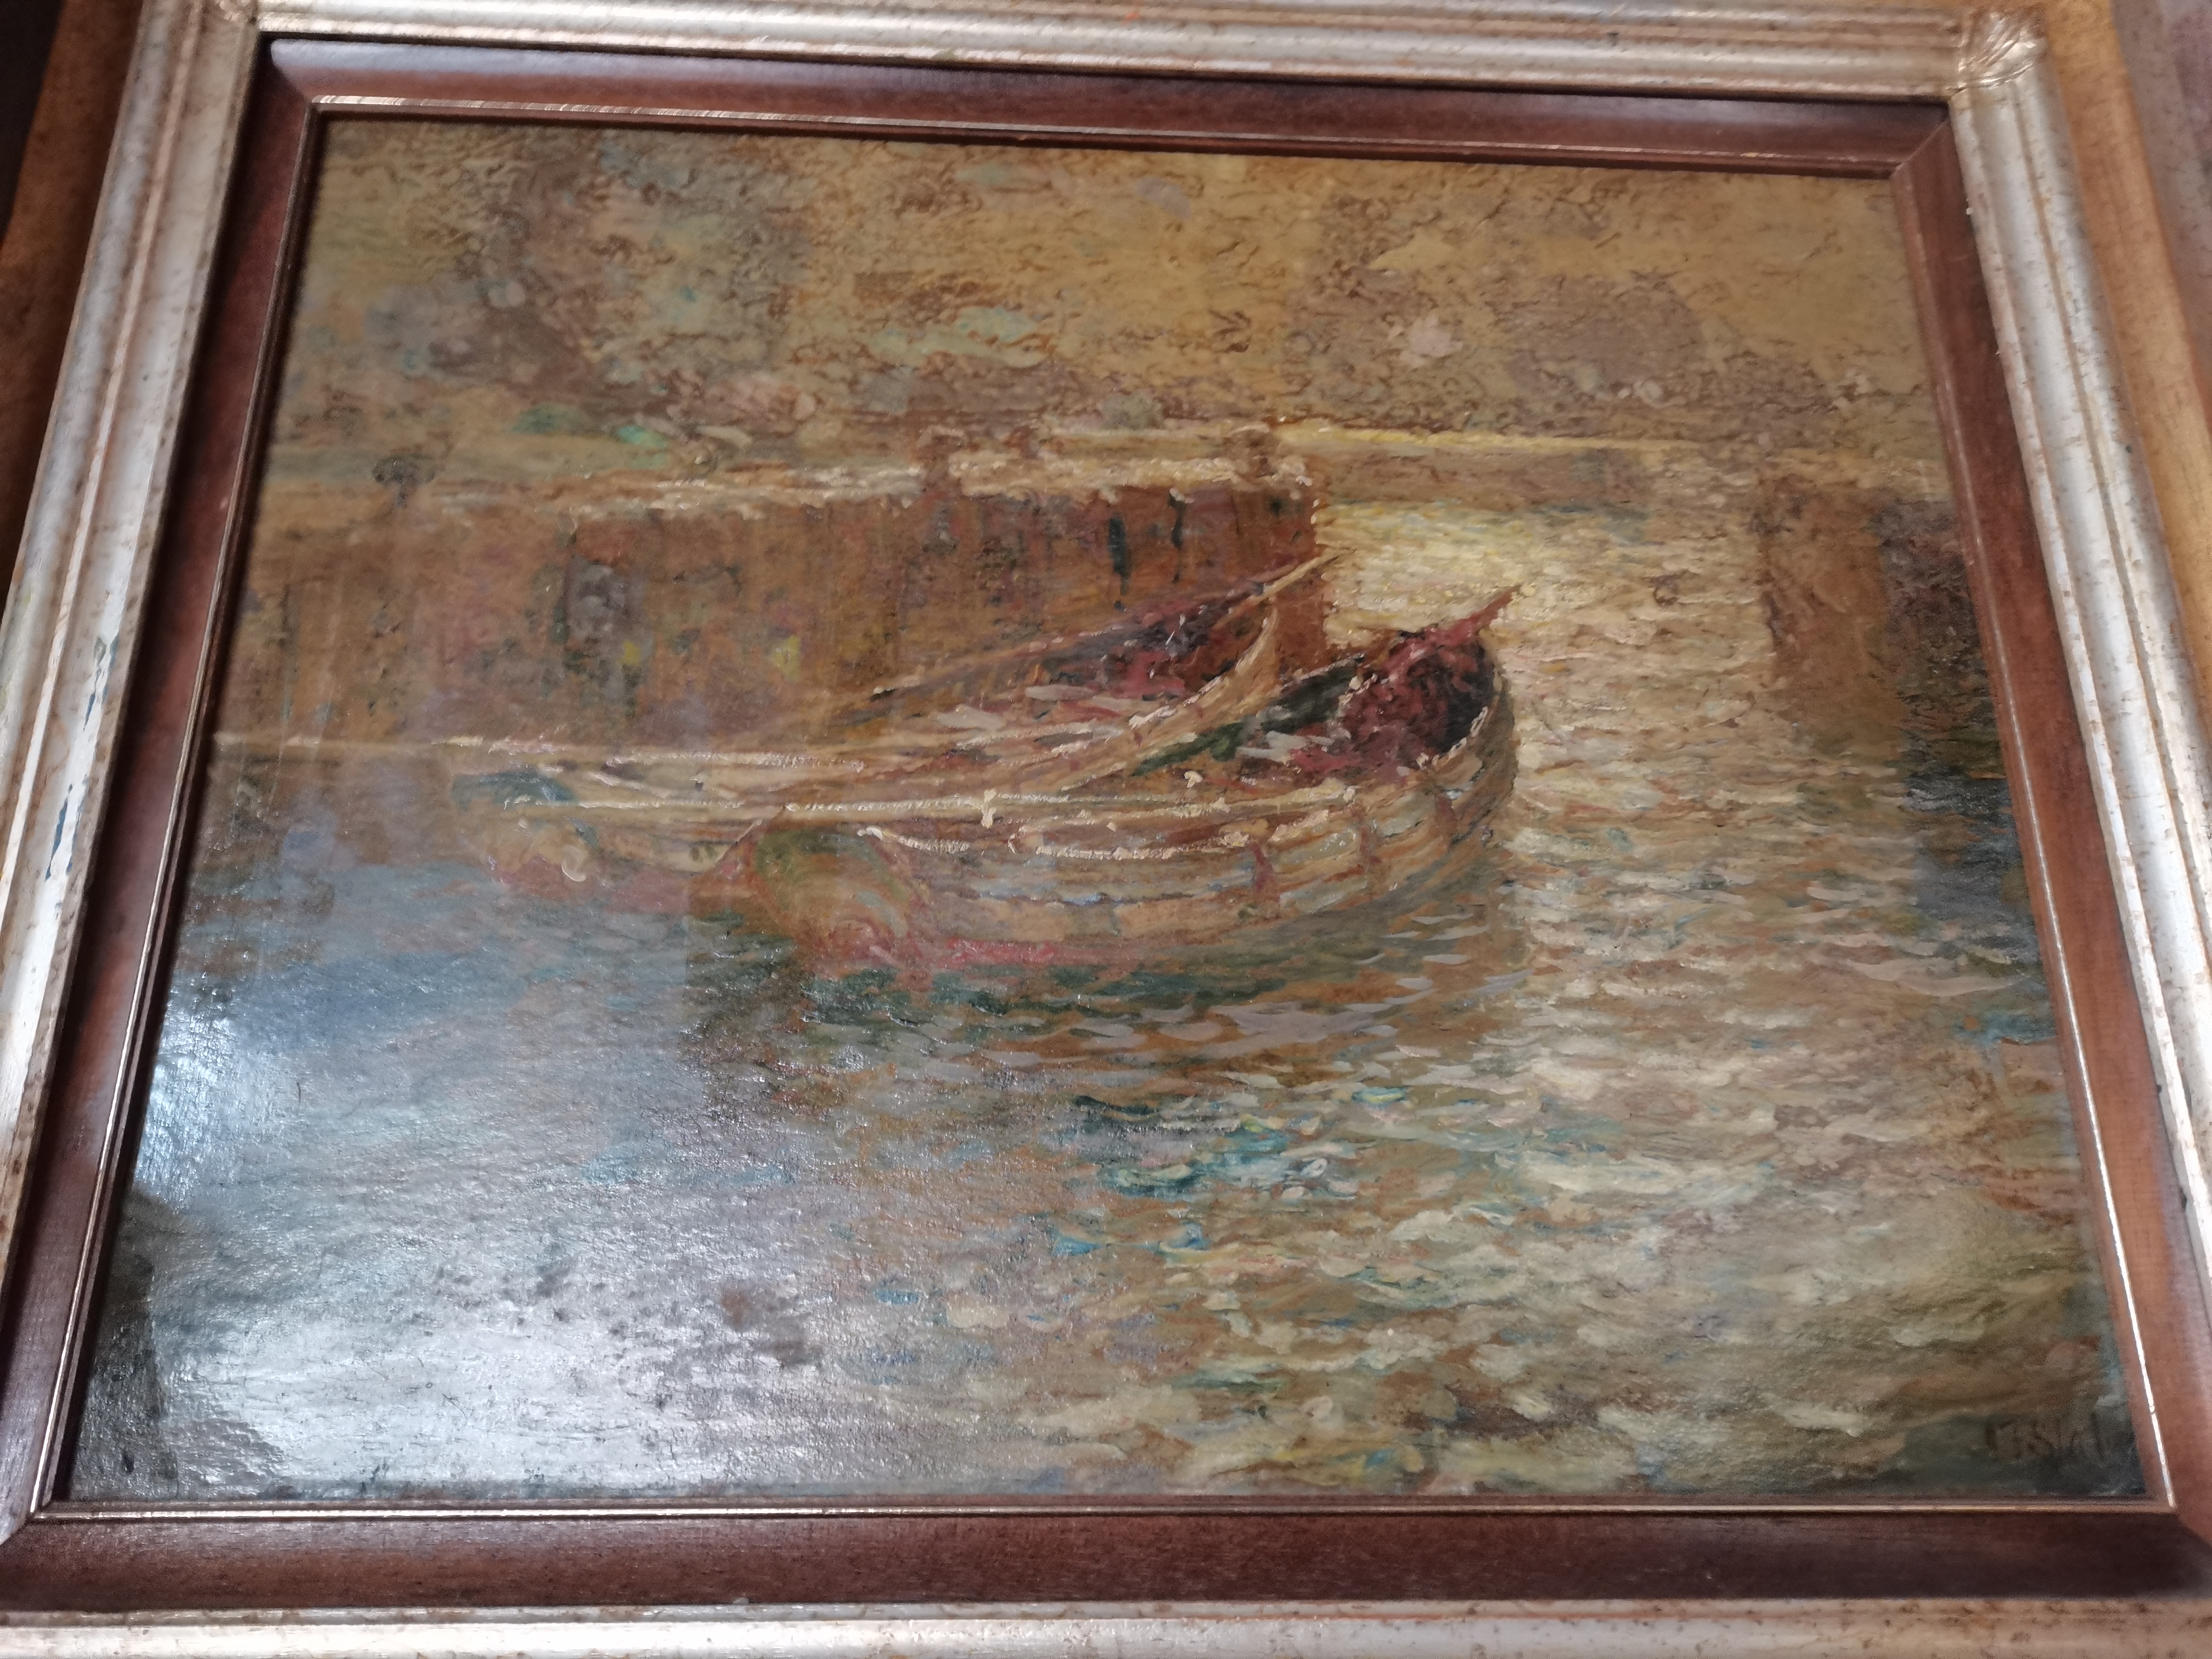 Oil painting J.F. Slater Boat Northumberland 60cm x 50cm in good condition - Image 3 of 3